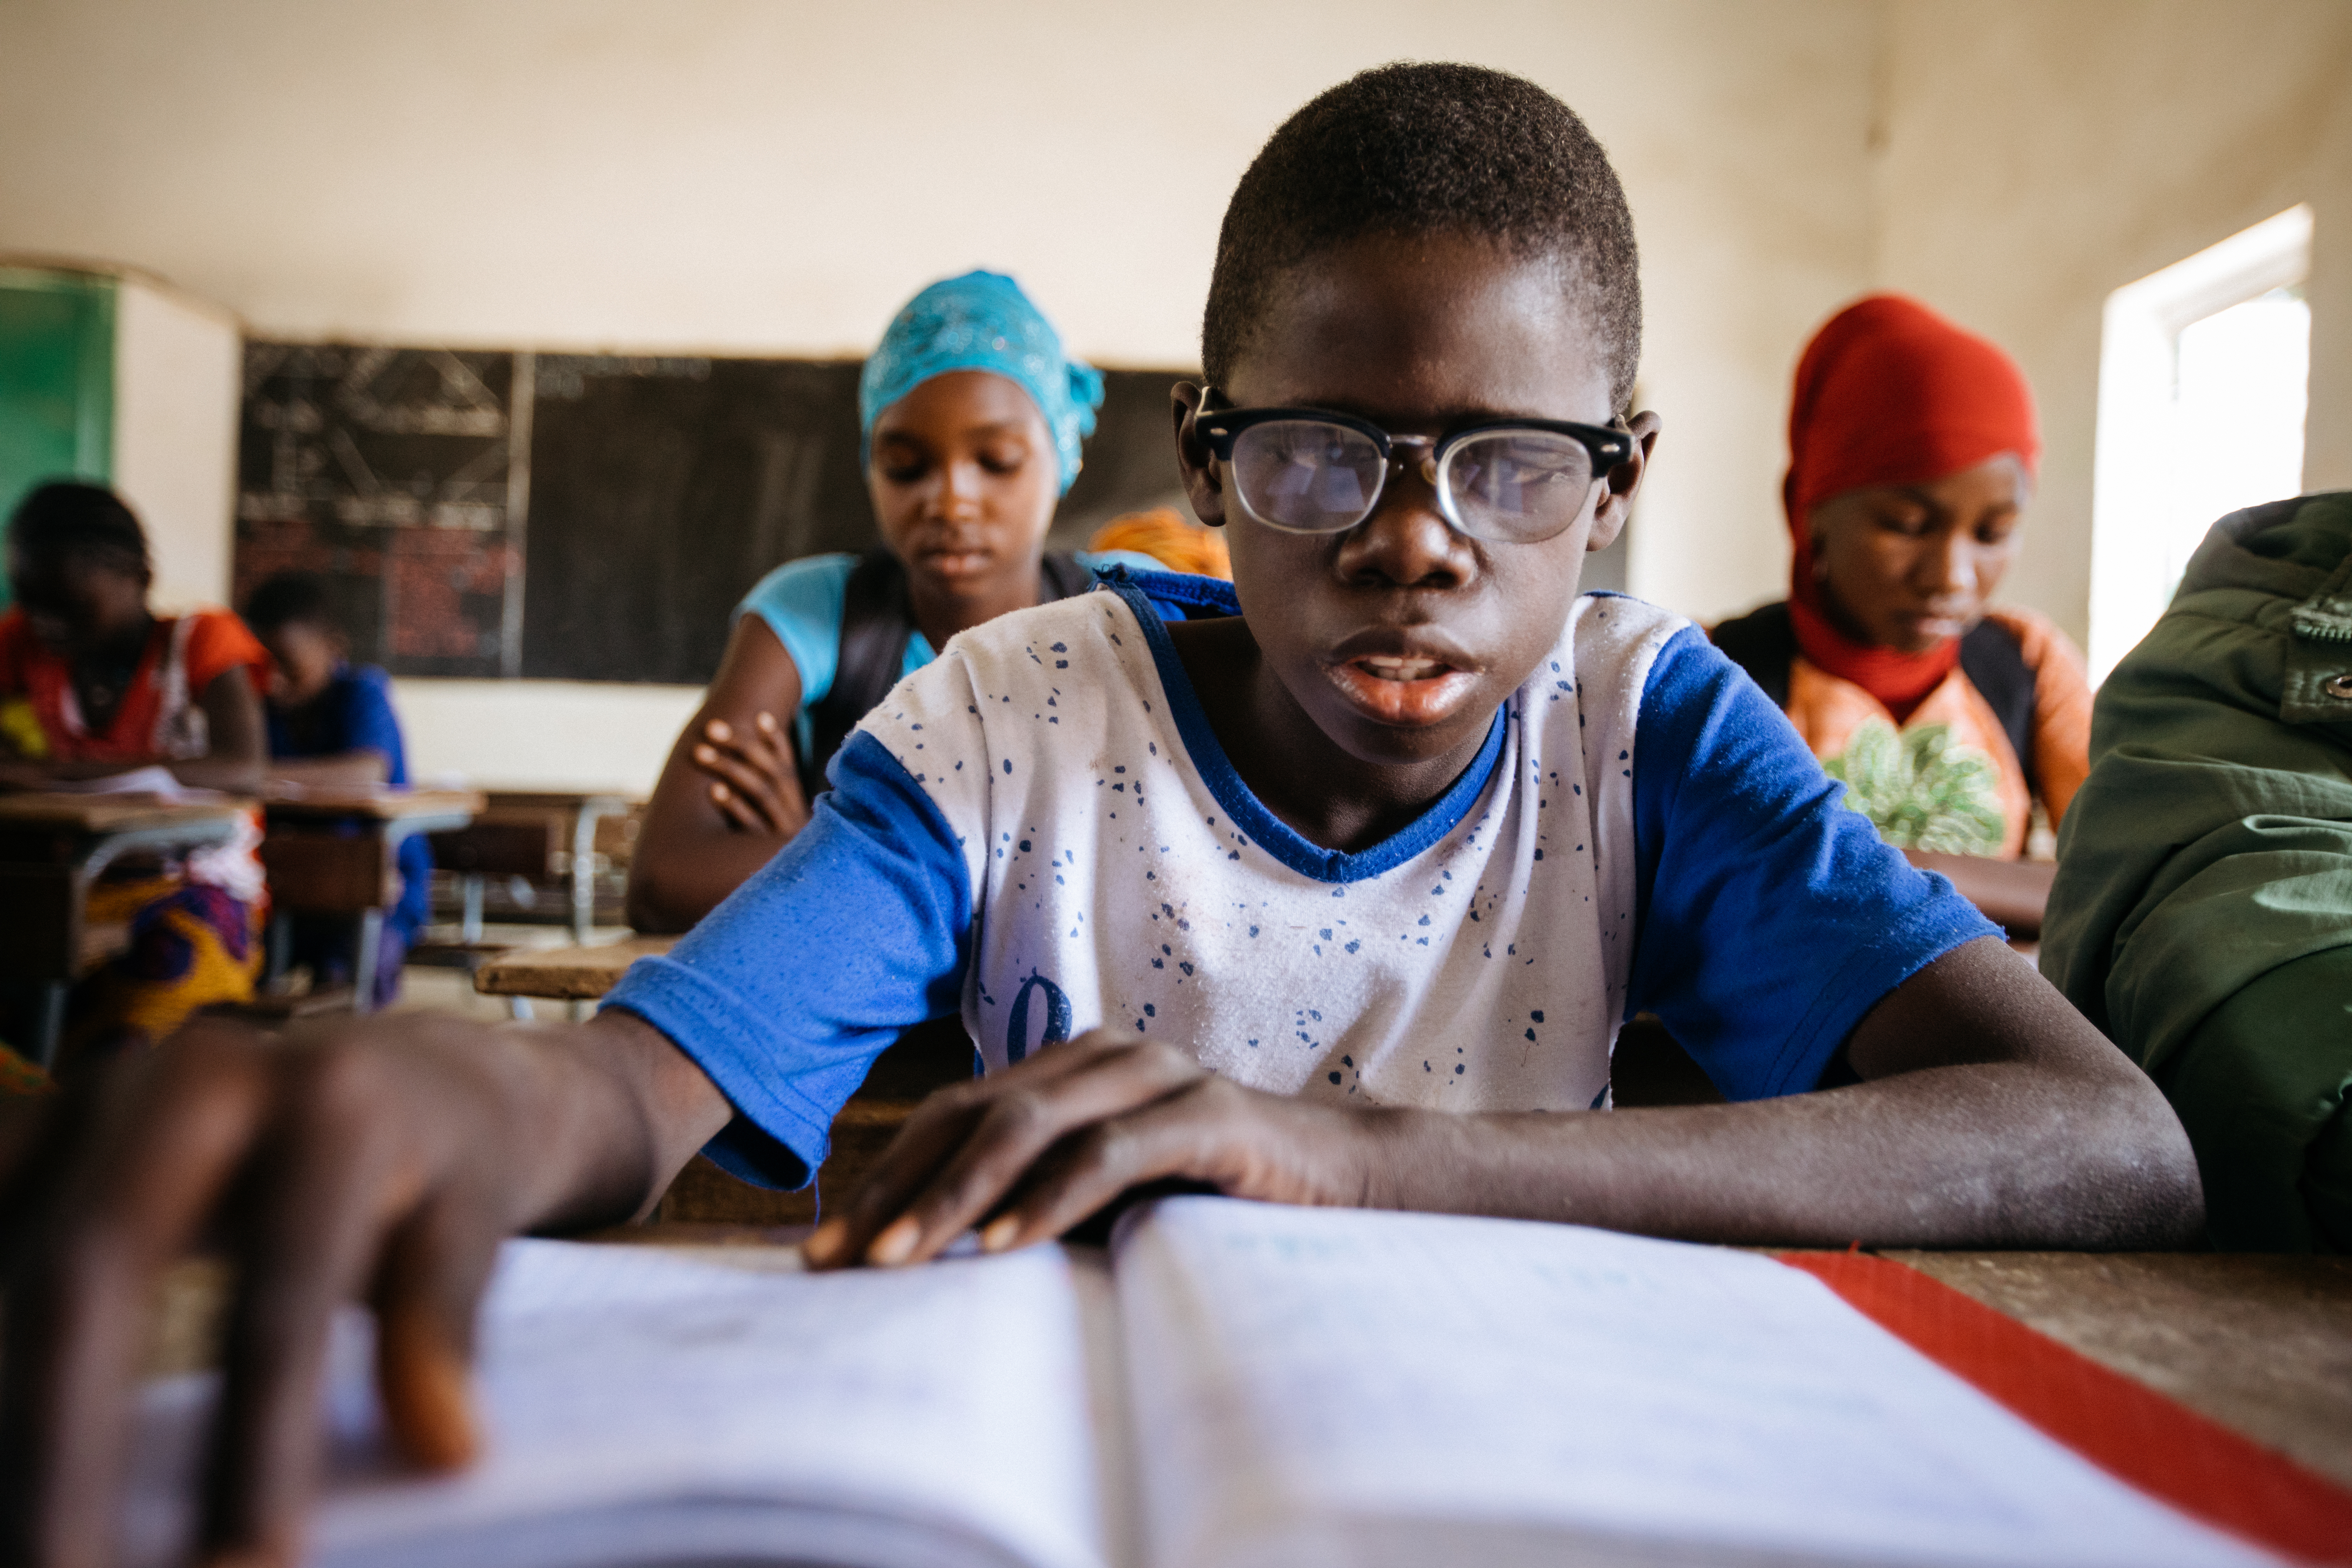 Child from Senegal wearing glasses sits at a desk reading the book in front of them, in a classroom